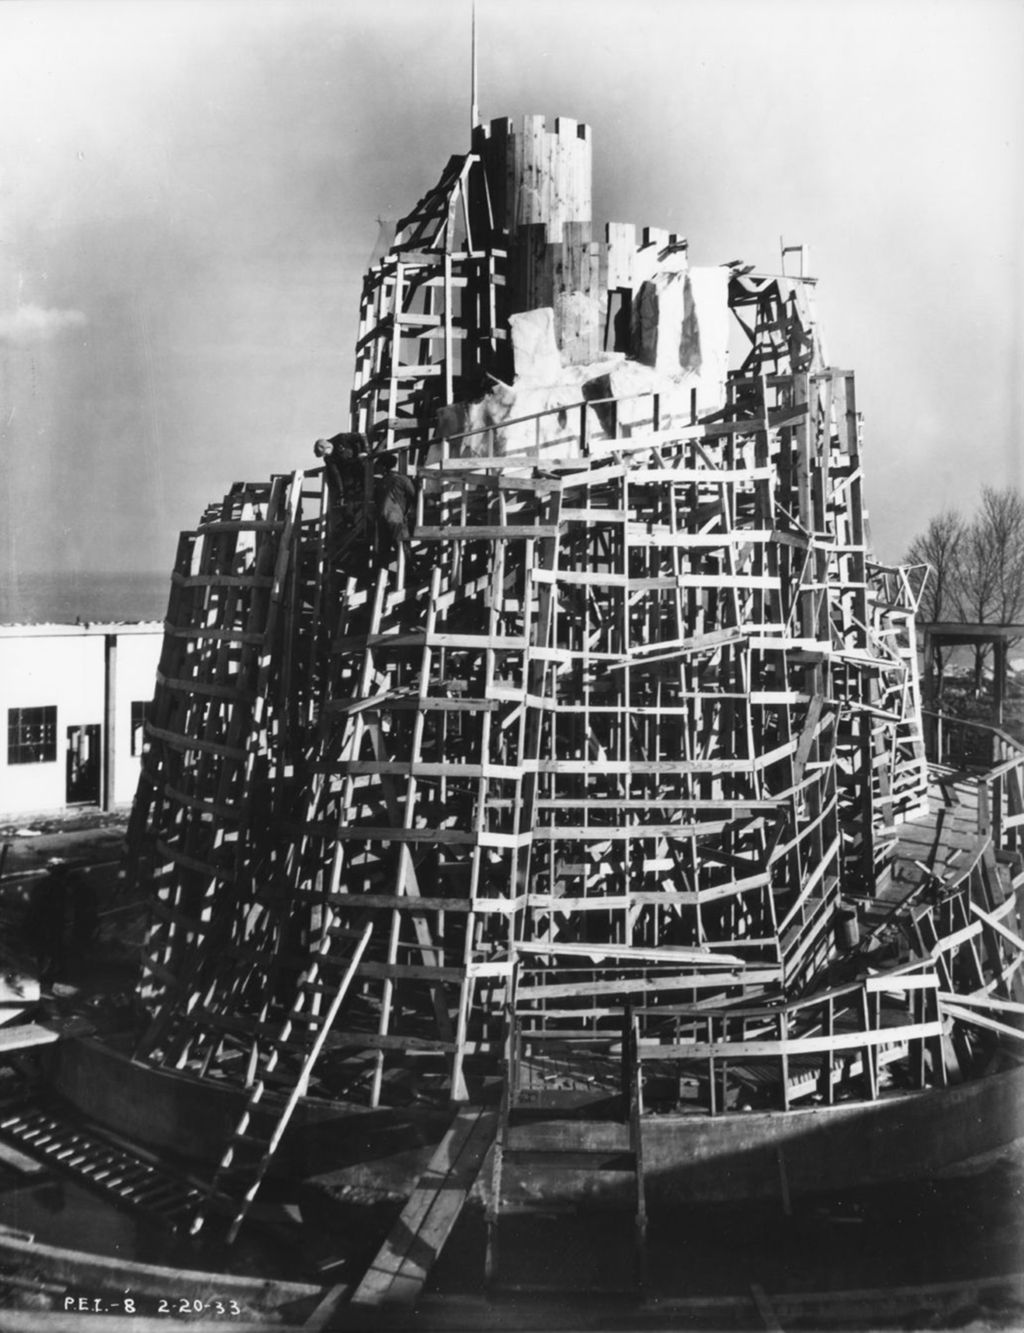 Miniature of Enchanted Isle during construction